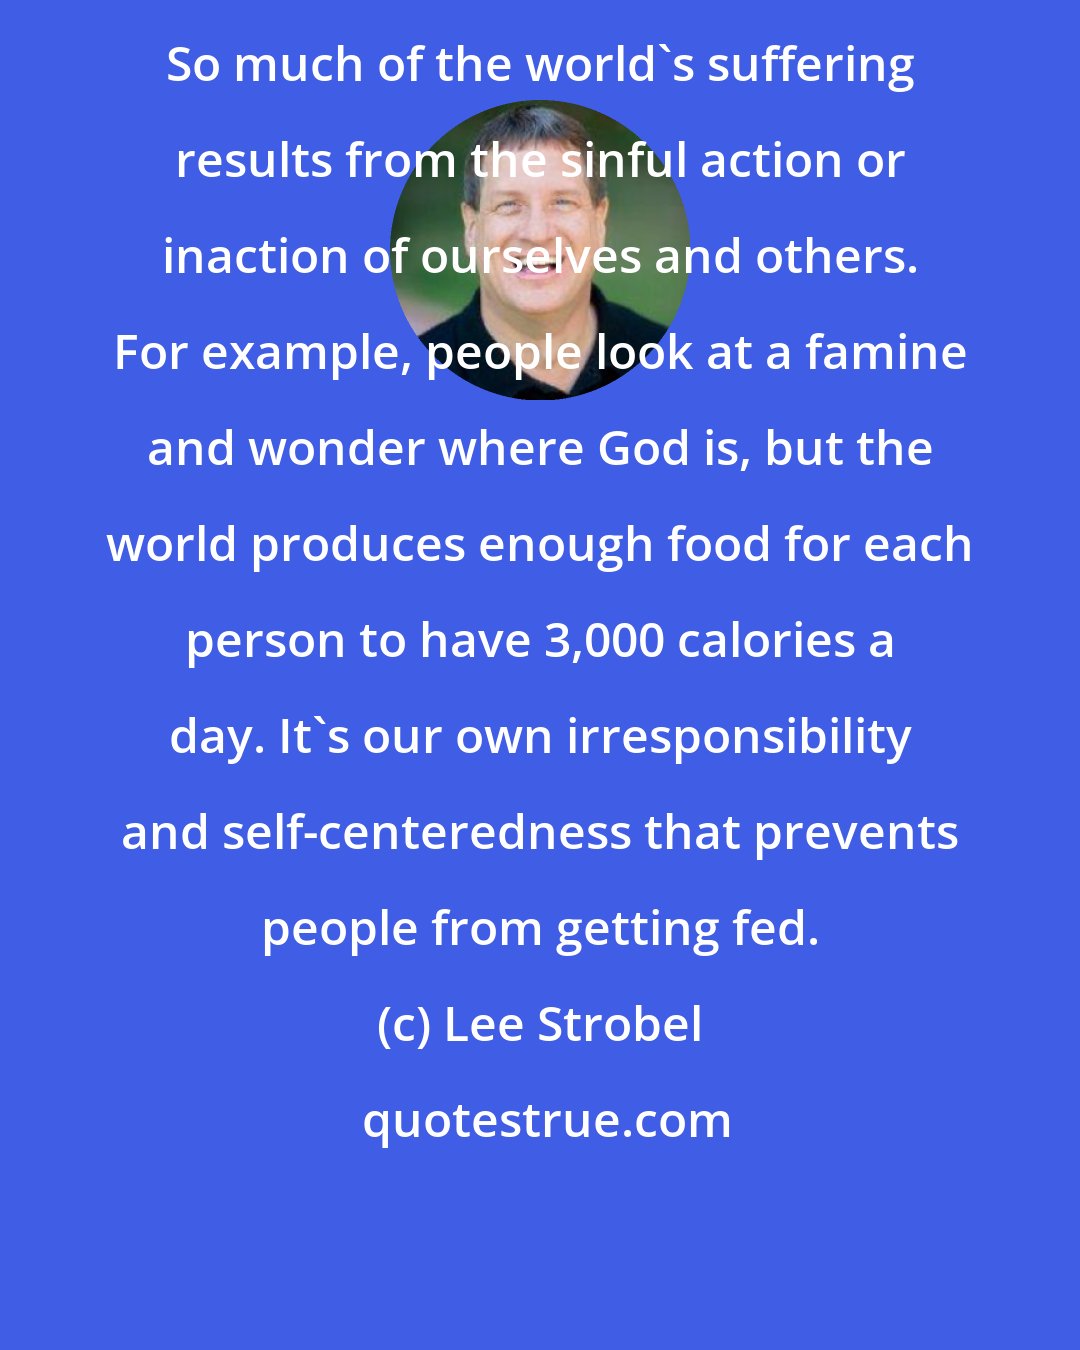 Lee Strobel: So much of the world's suffering results from the sinful action or inaction of ourselves and others. For example, people look at a famine and wonder where God is, but the world produces enough food for each person to have 3,000 calories a day. It's our own irresponsibility and self-centeredness that prevents people from getting fed.